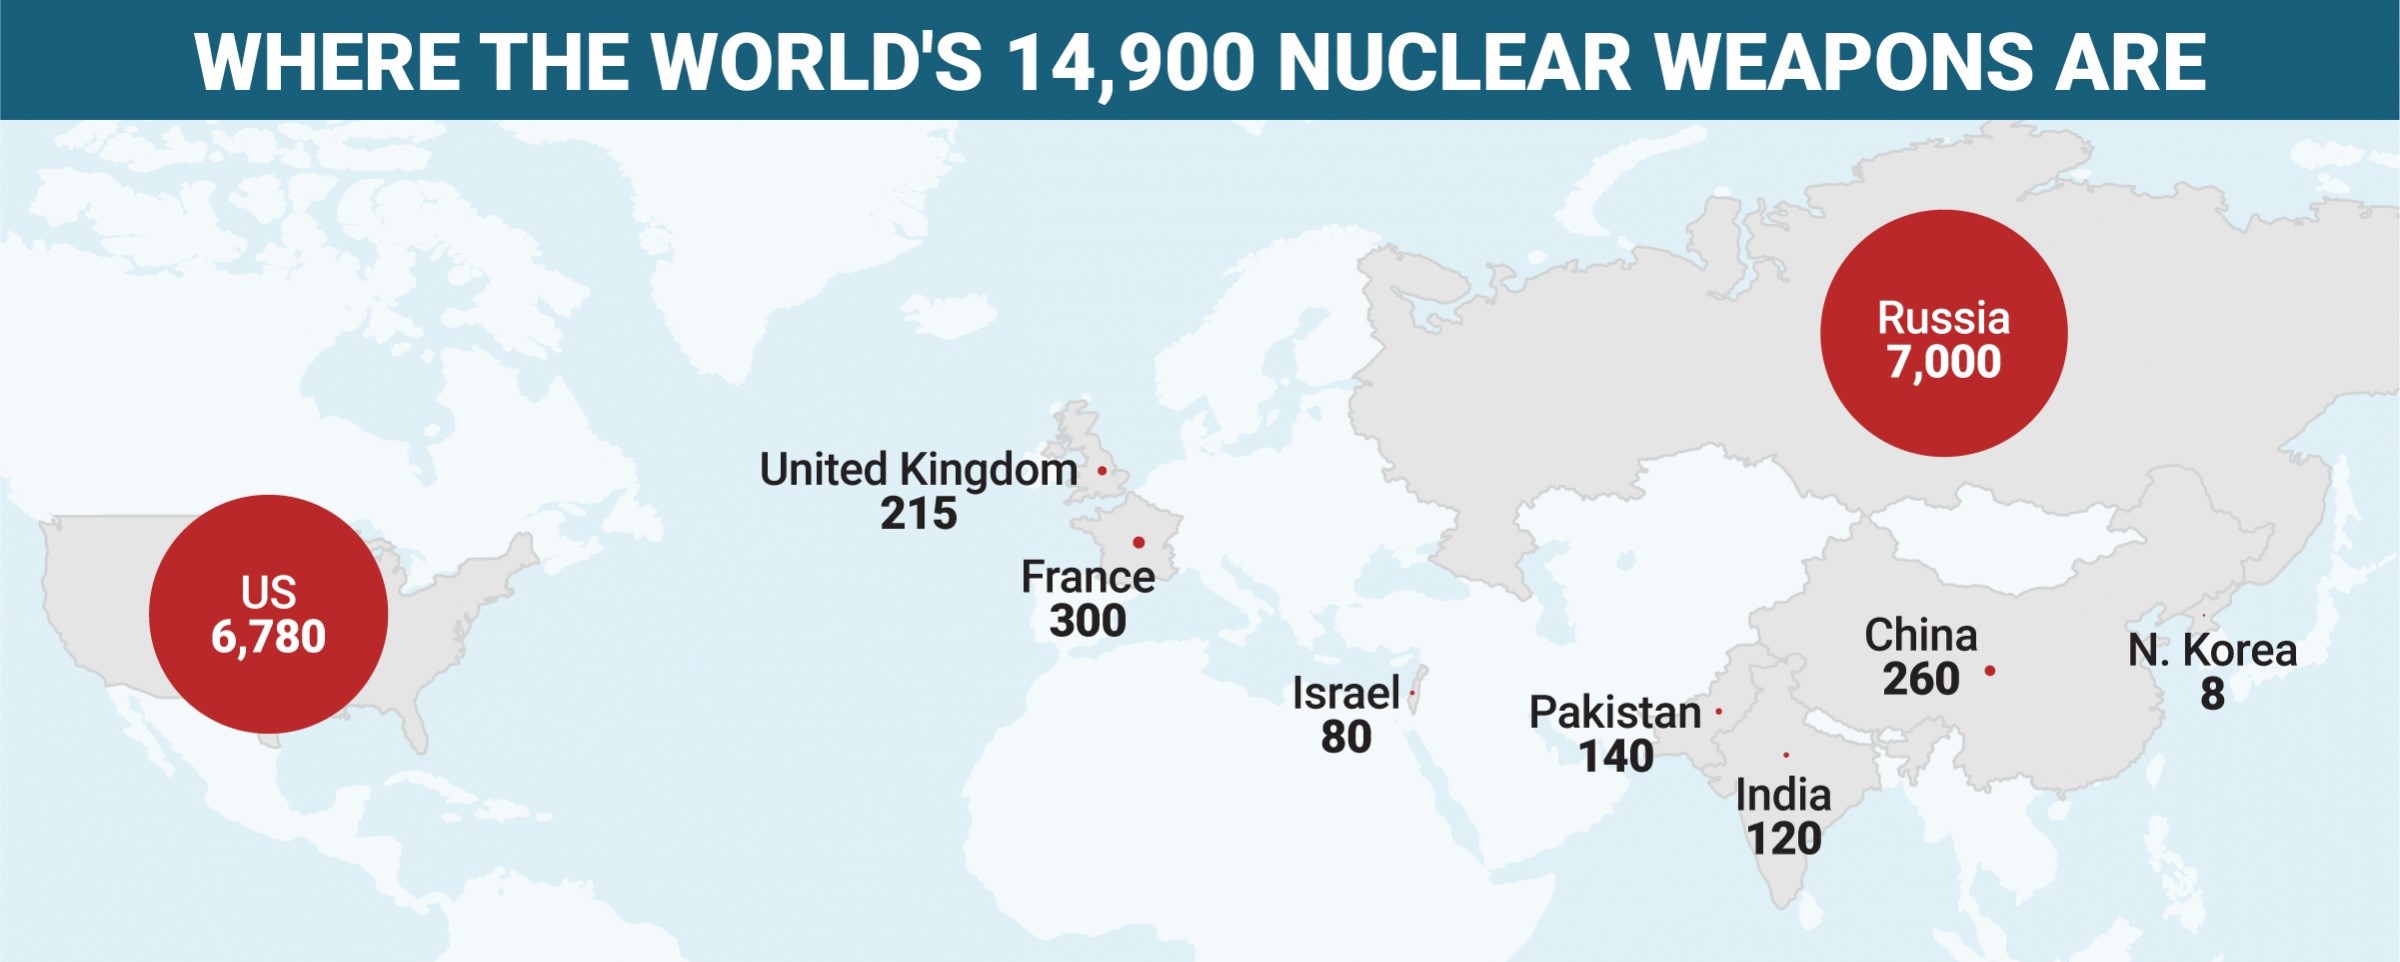 Distribution of nuclear weapons, shown on a world map